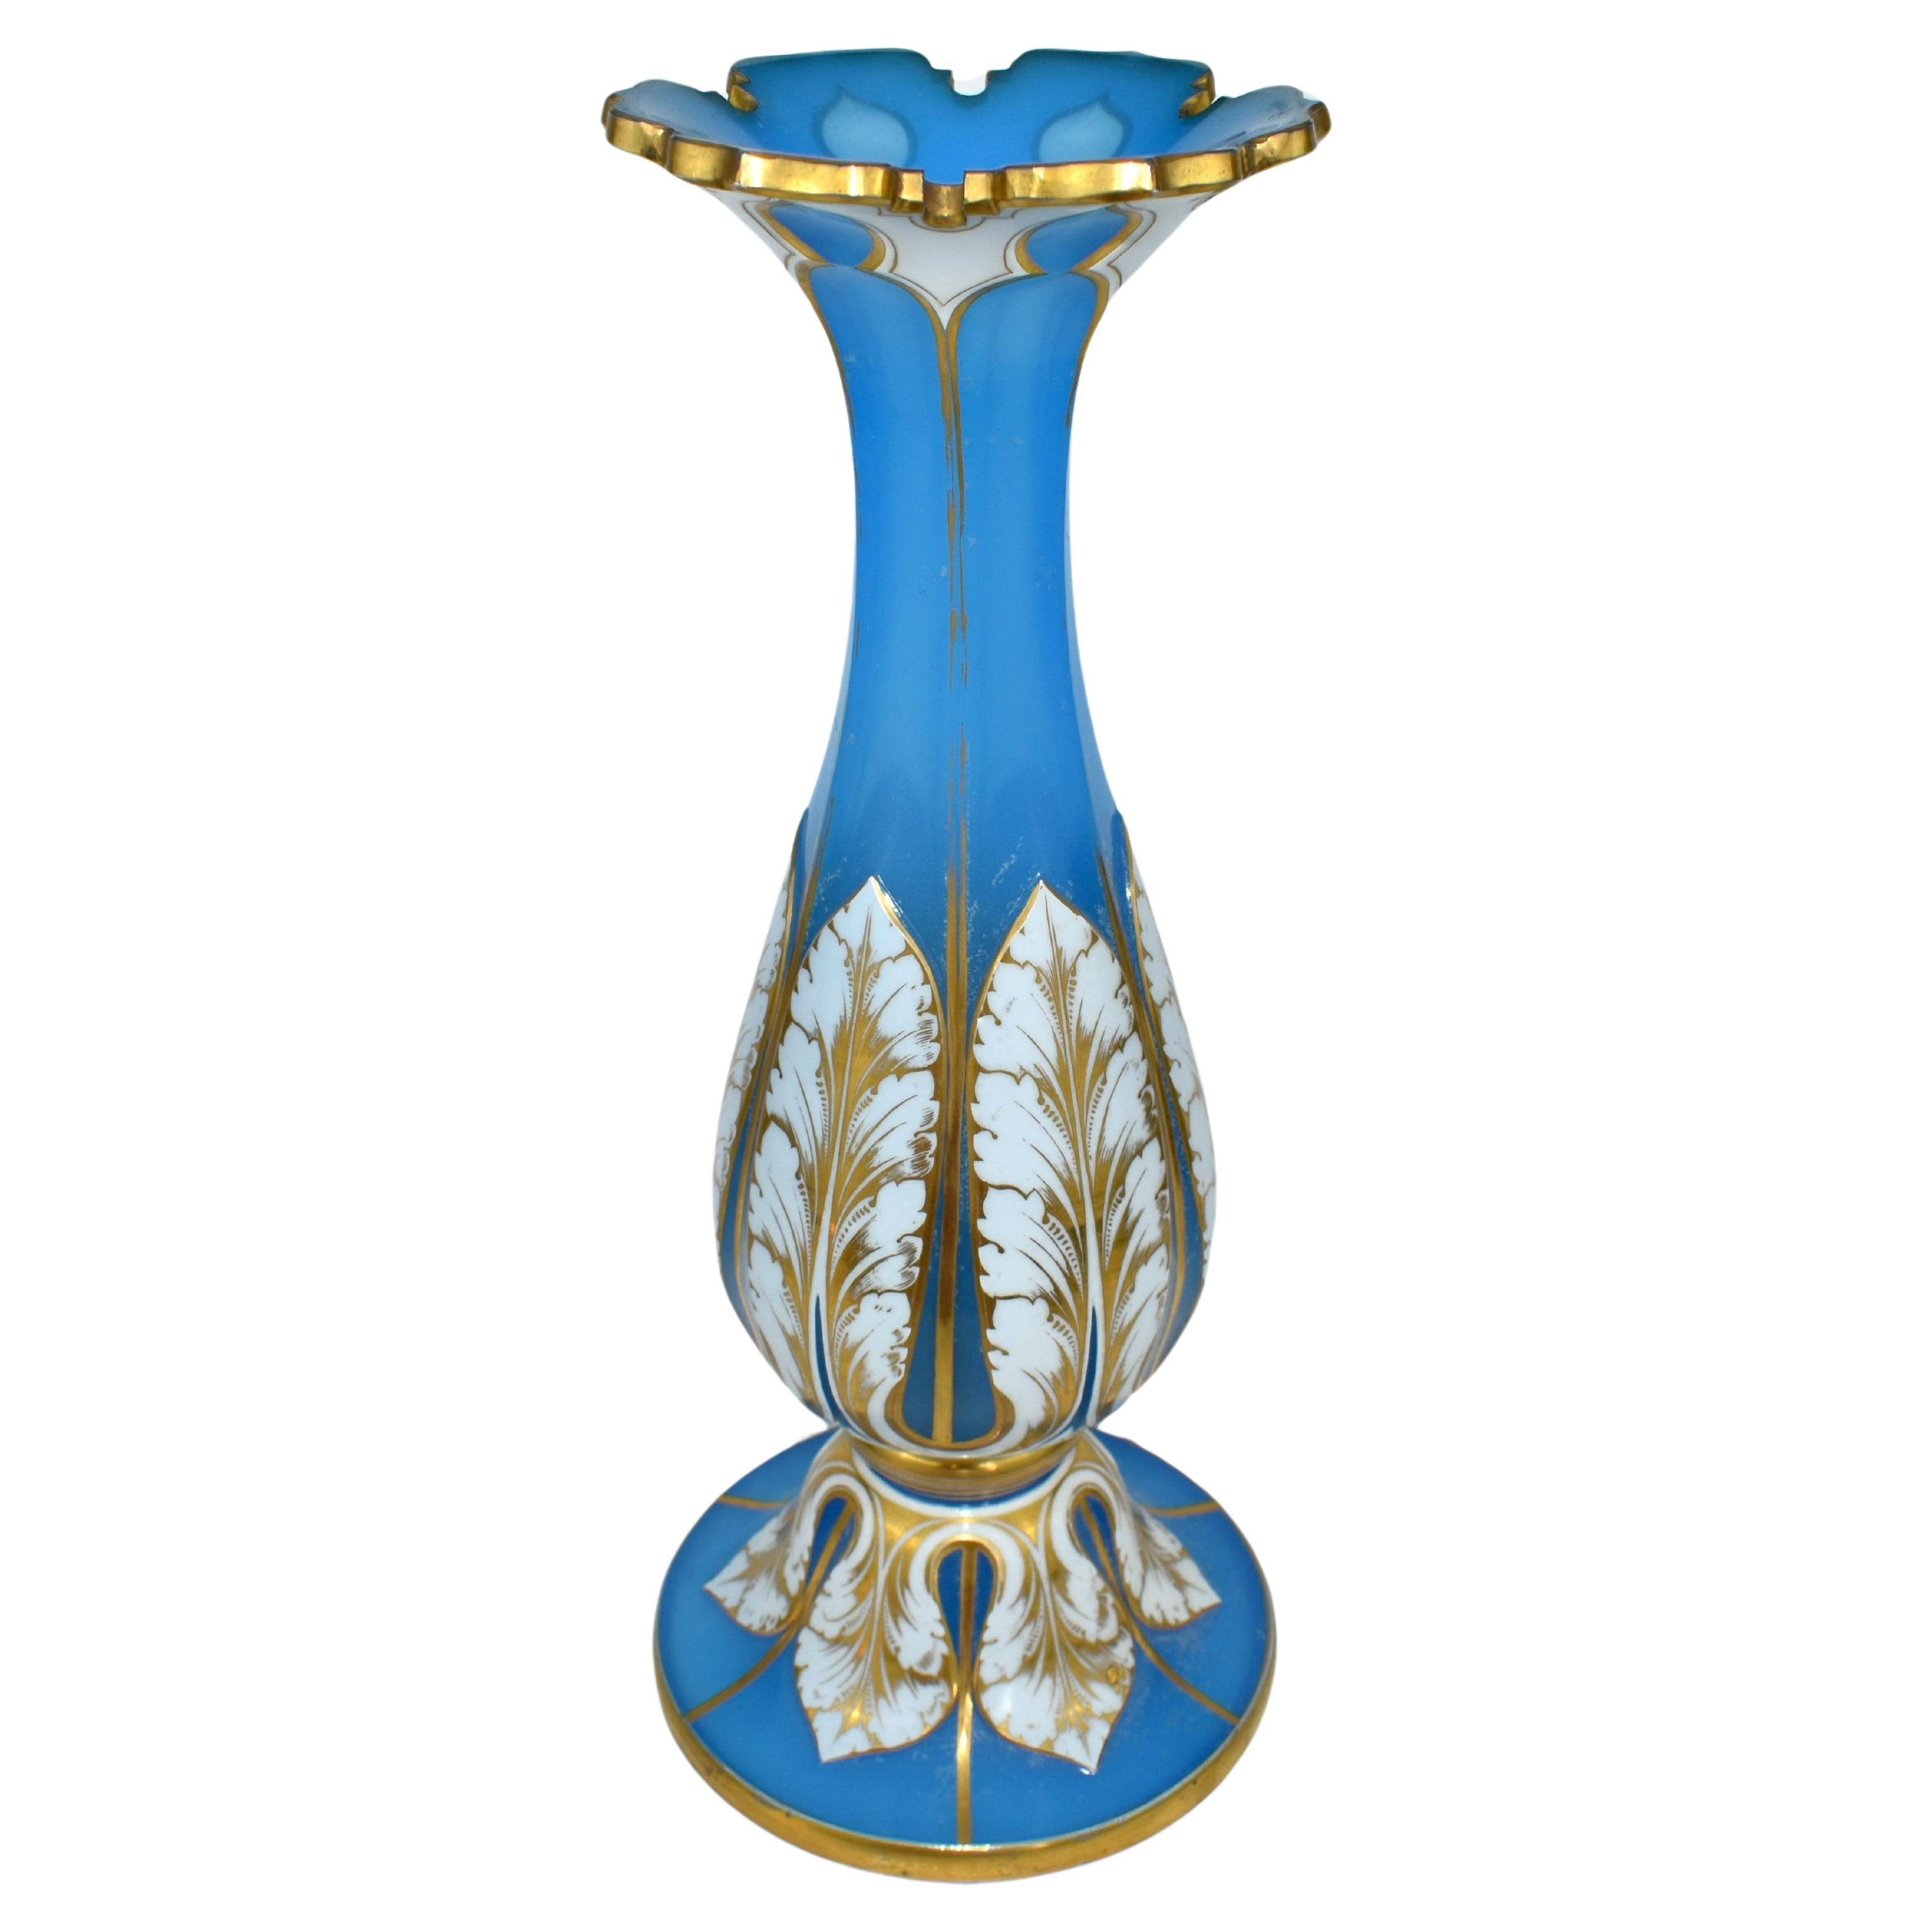 Exceptional Opaline Overlay Glass Vase, White Over Blue

Blue Opaline Overlaid with Milky White Opaline Glass

Cut Gilded Rim

Rich and Fine Gilding Decoration all around

Bohemia, circa 1860.